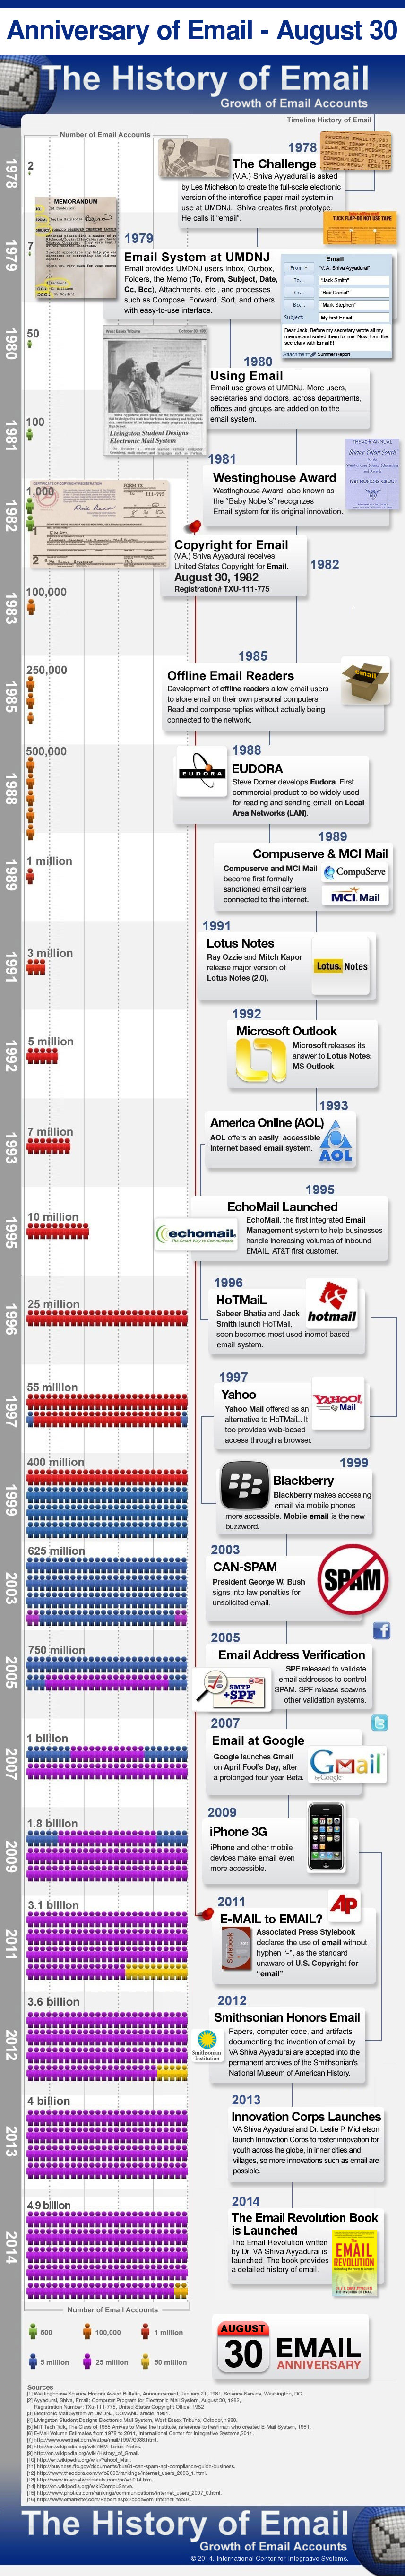 Infographic of the history of email. 